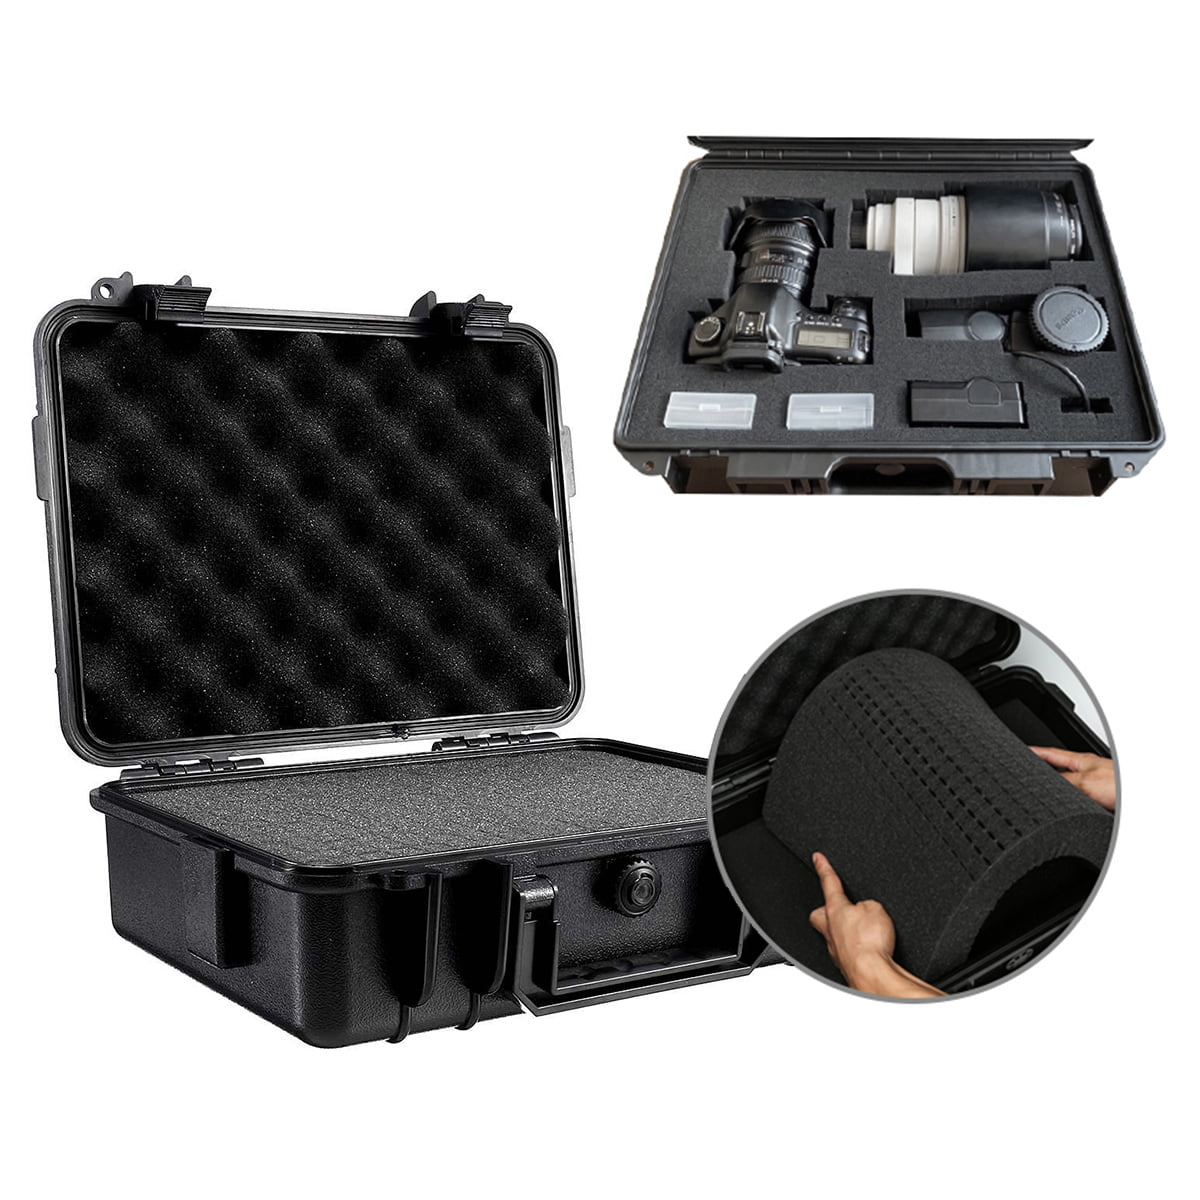 Waterproof Portable Hard Carry Tool Kits Protective Case Shockproof Storage Box 